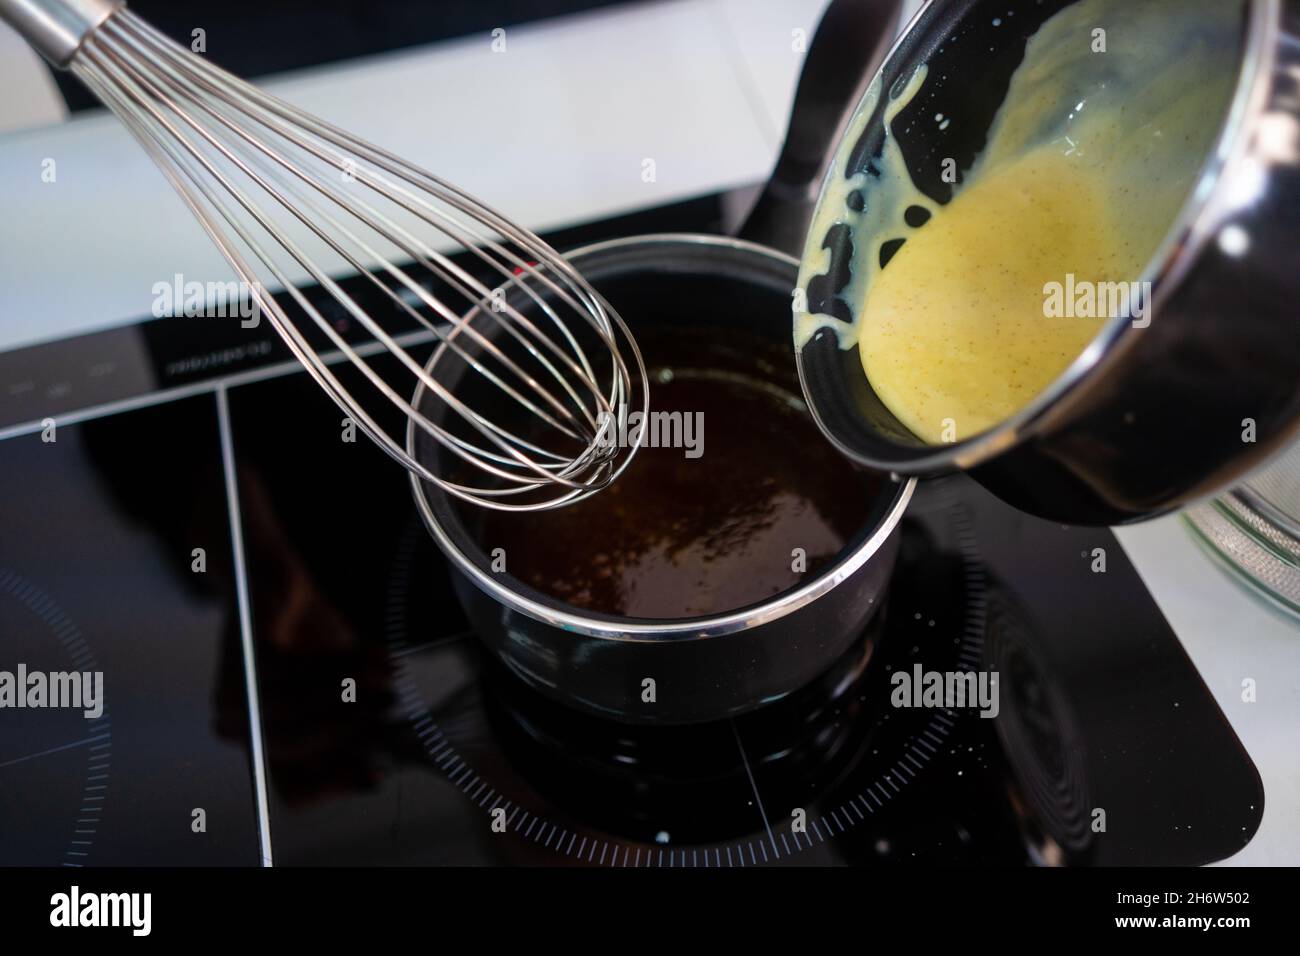 Pastry maker making chocolate for making the cake. Stock Photo